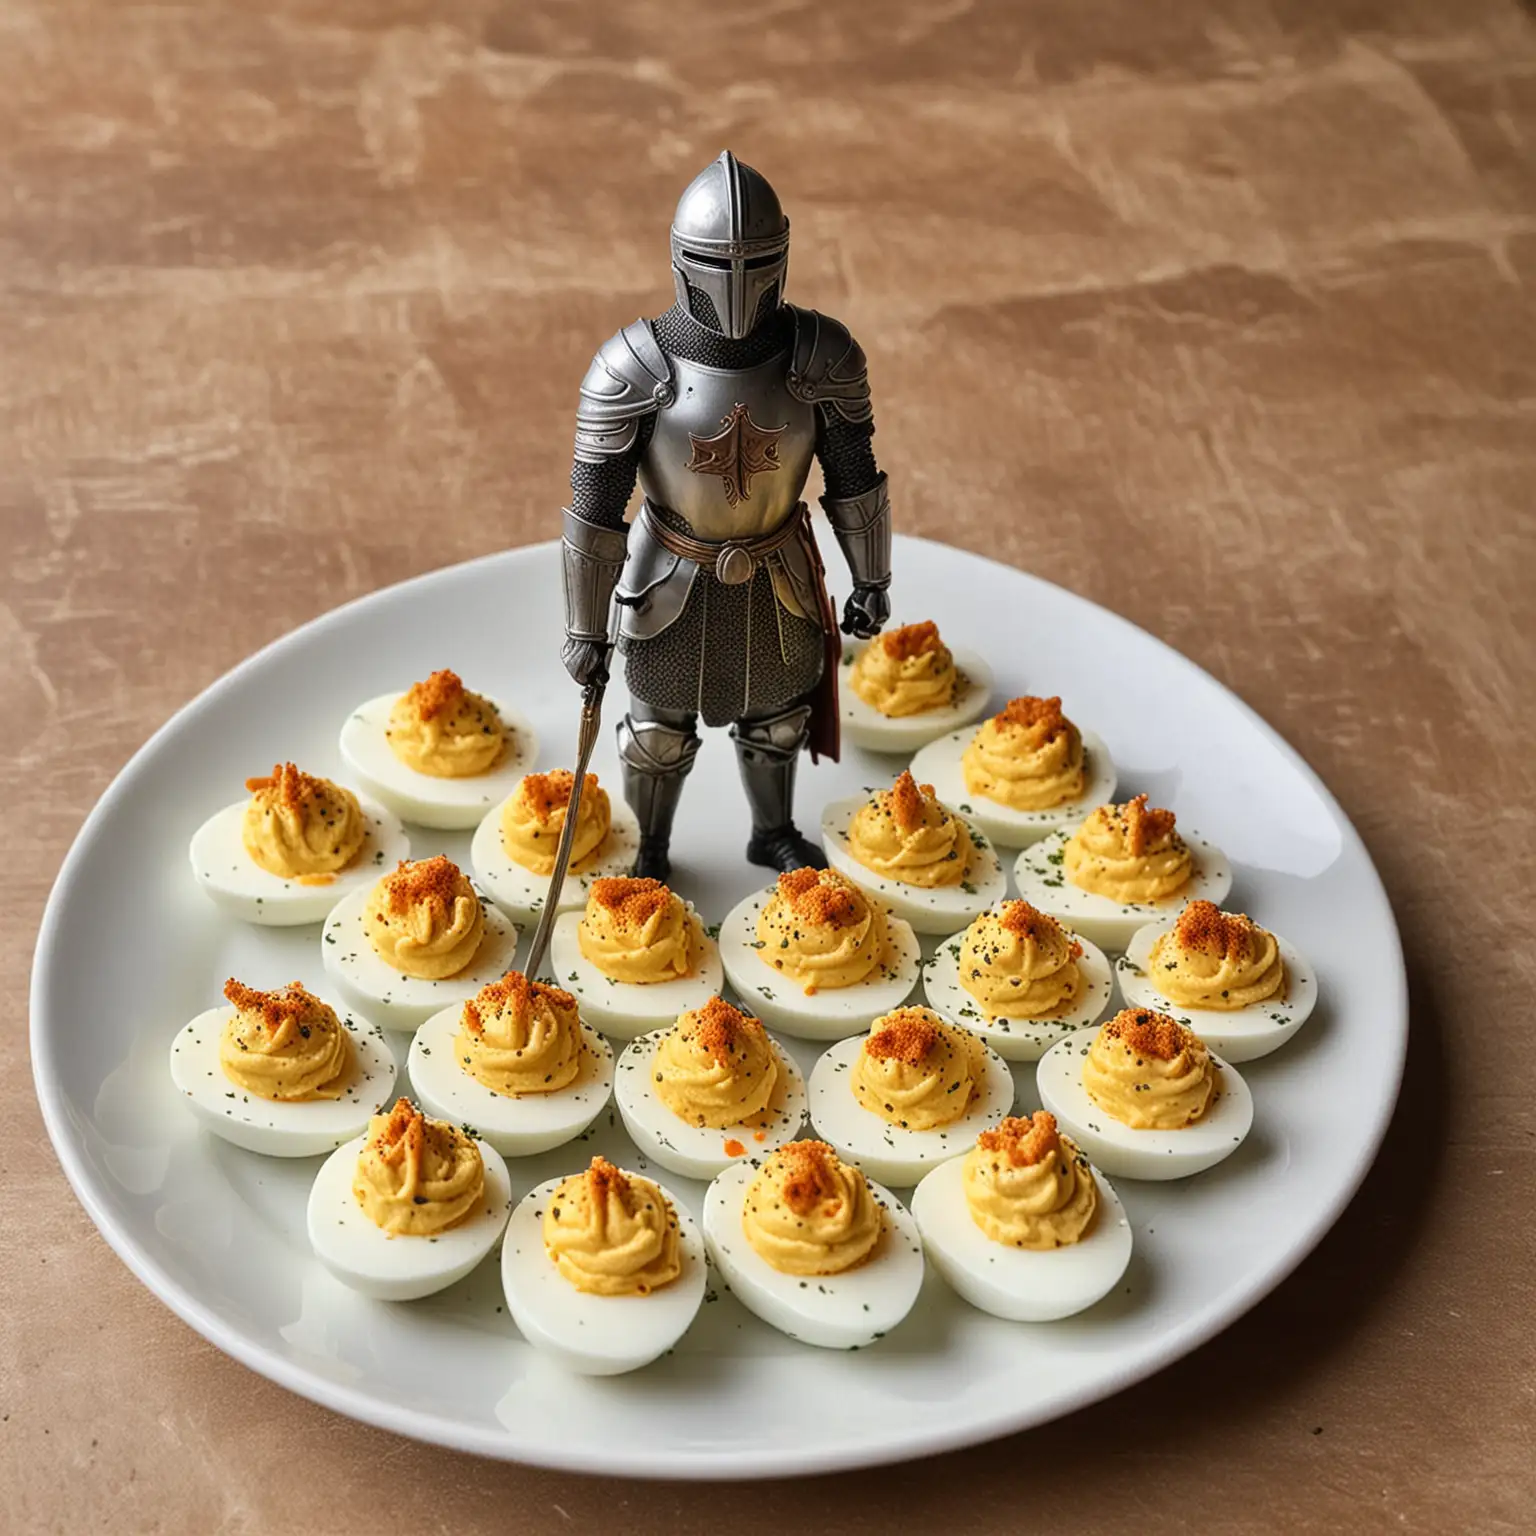 A knight guarding a plate of deviled eggs